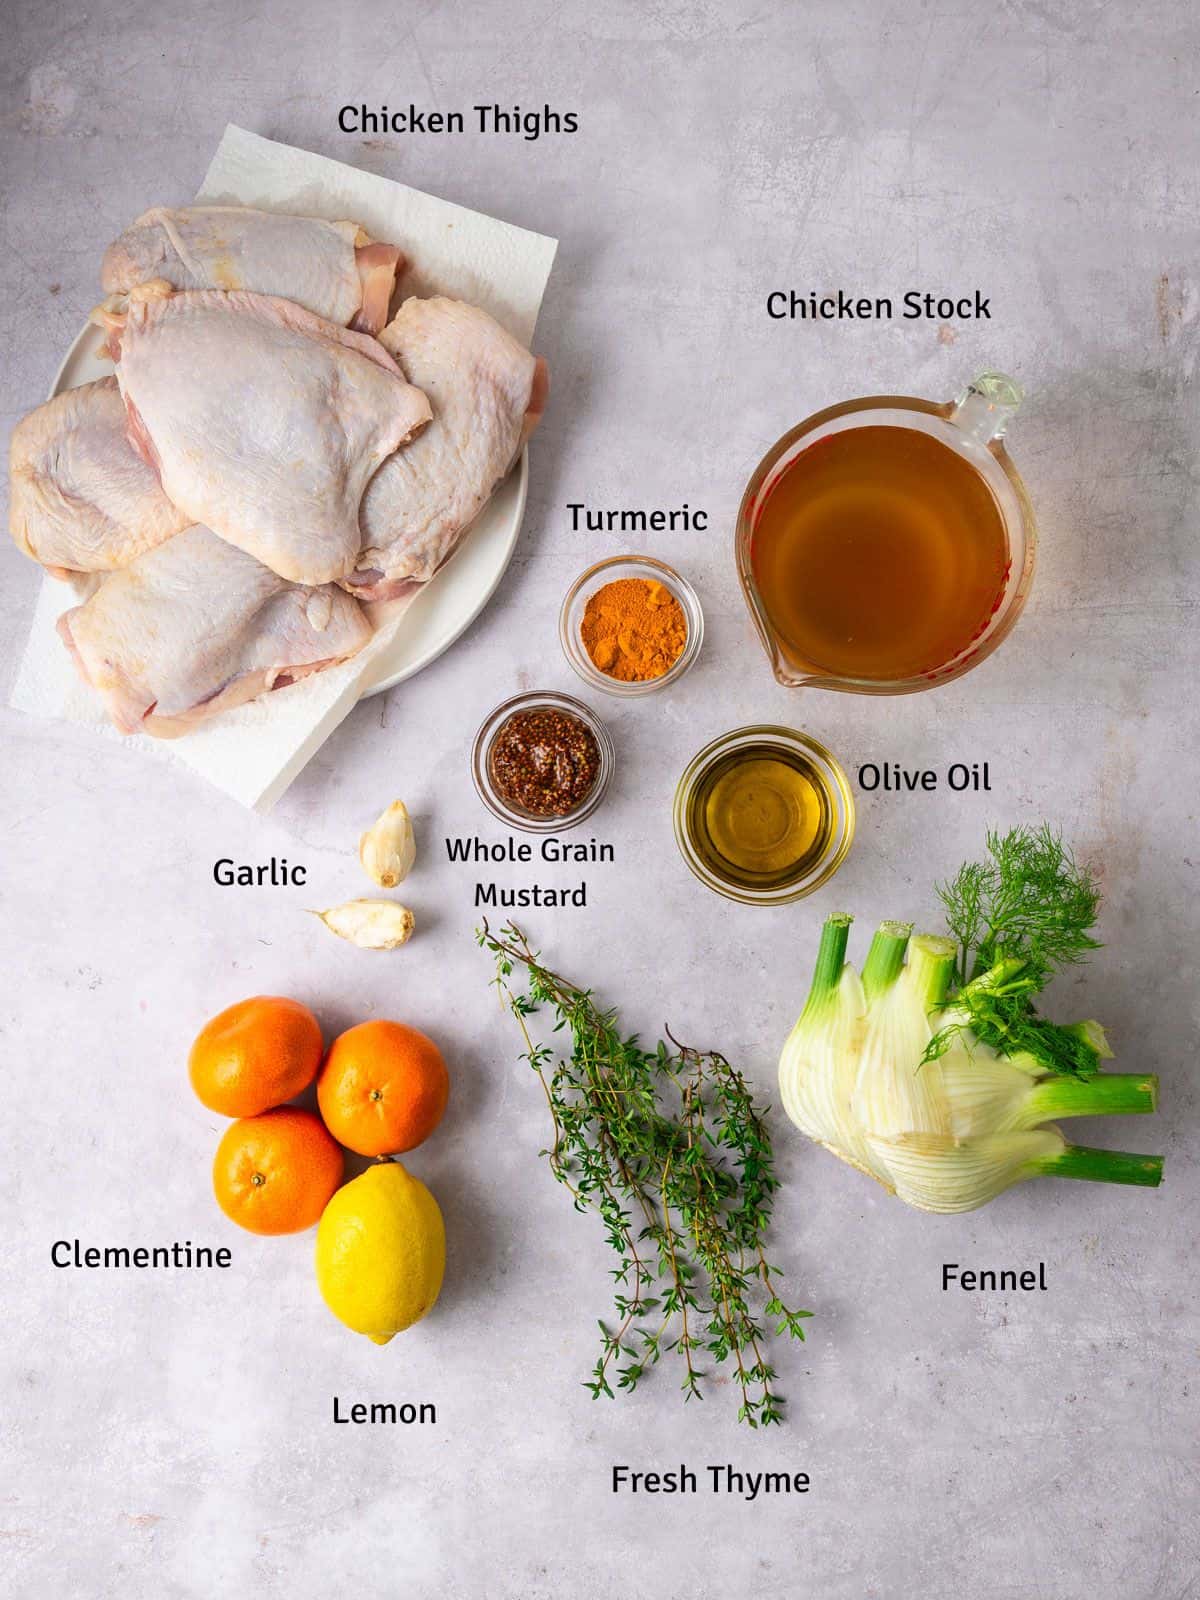 Ingredients for roasted citrus chicken with fennel, including turmeric, clementines, lemon and fresh thyme.